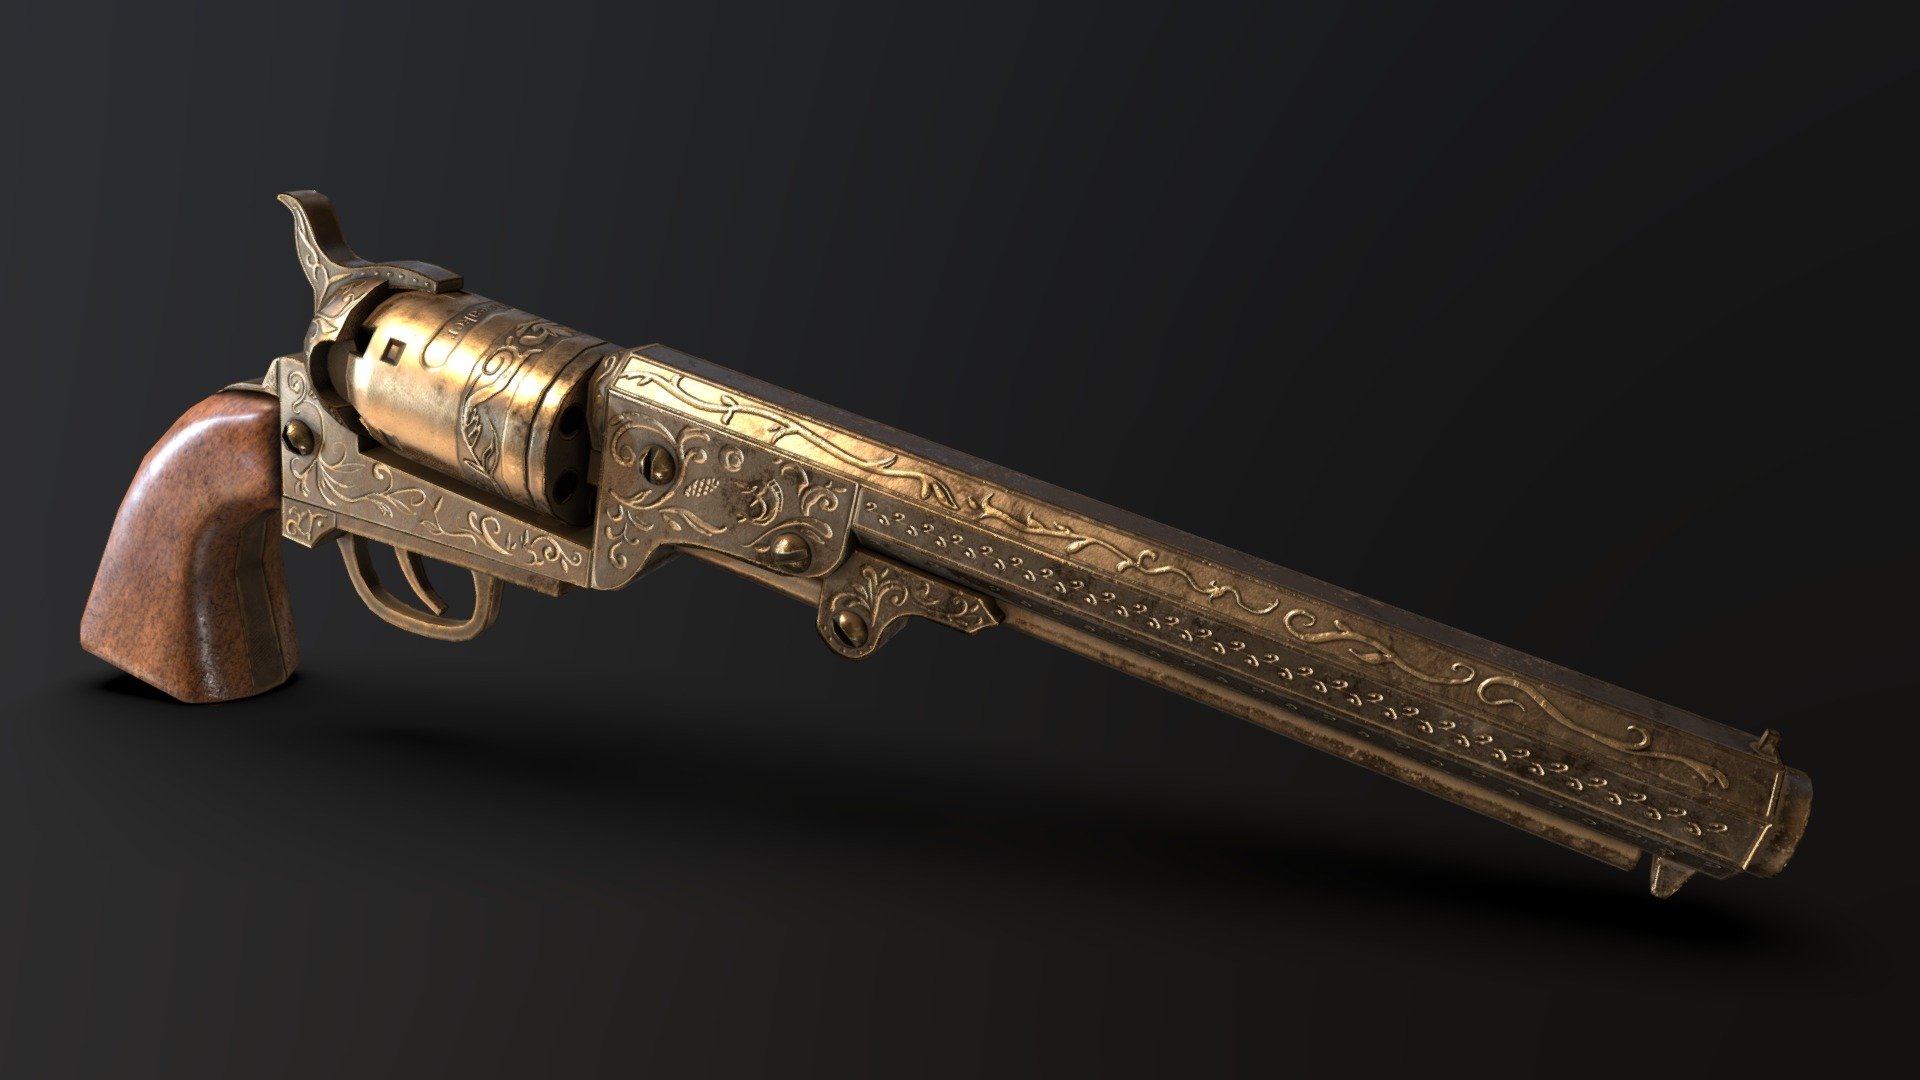 An ornate revolver, the weapon of a dreadful dandy bandit. Made with 3DS Max and Substance Painter 3d model